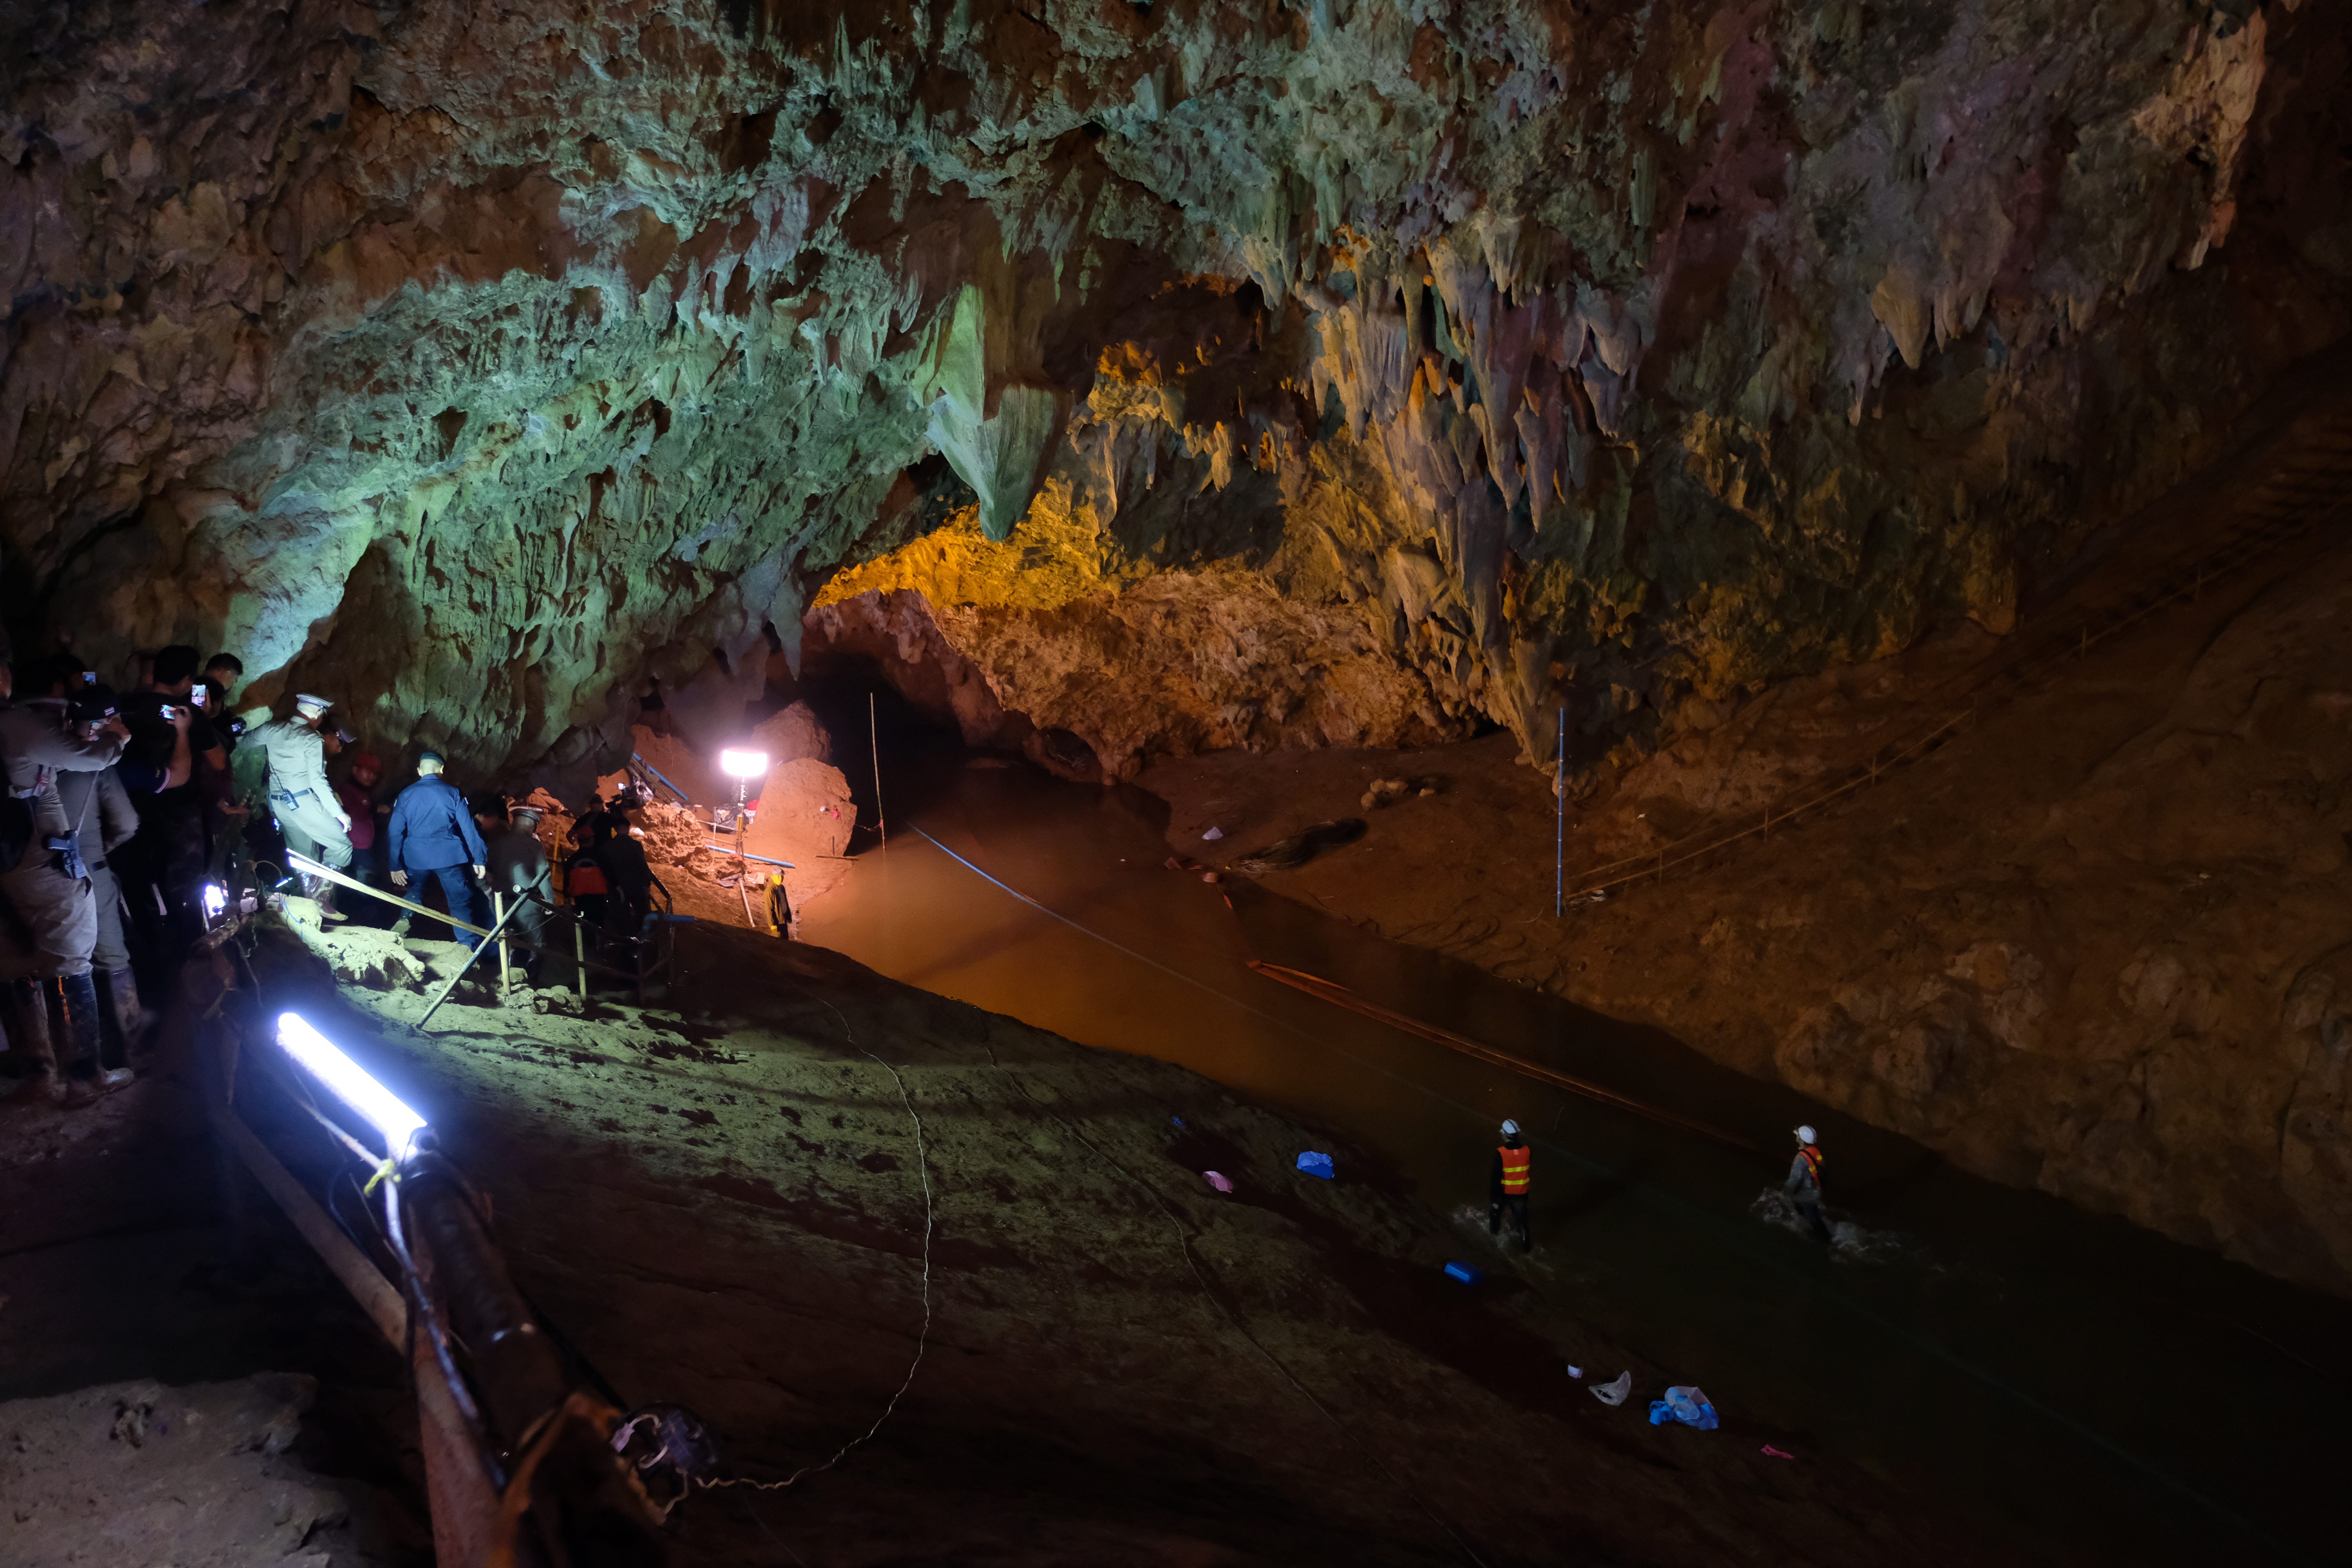 Thai officers supervise the rescue mission inside Tham Luang Nang Non cave on in Chiang Rai, Thailand. Rescuers battle heavy rain in northern Thailand as they continued the search for 12 boys and their soccer coach who have been missing in Tham Luang